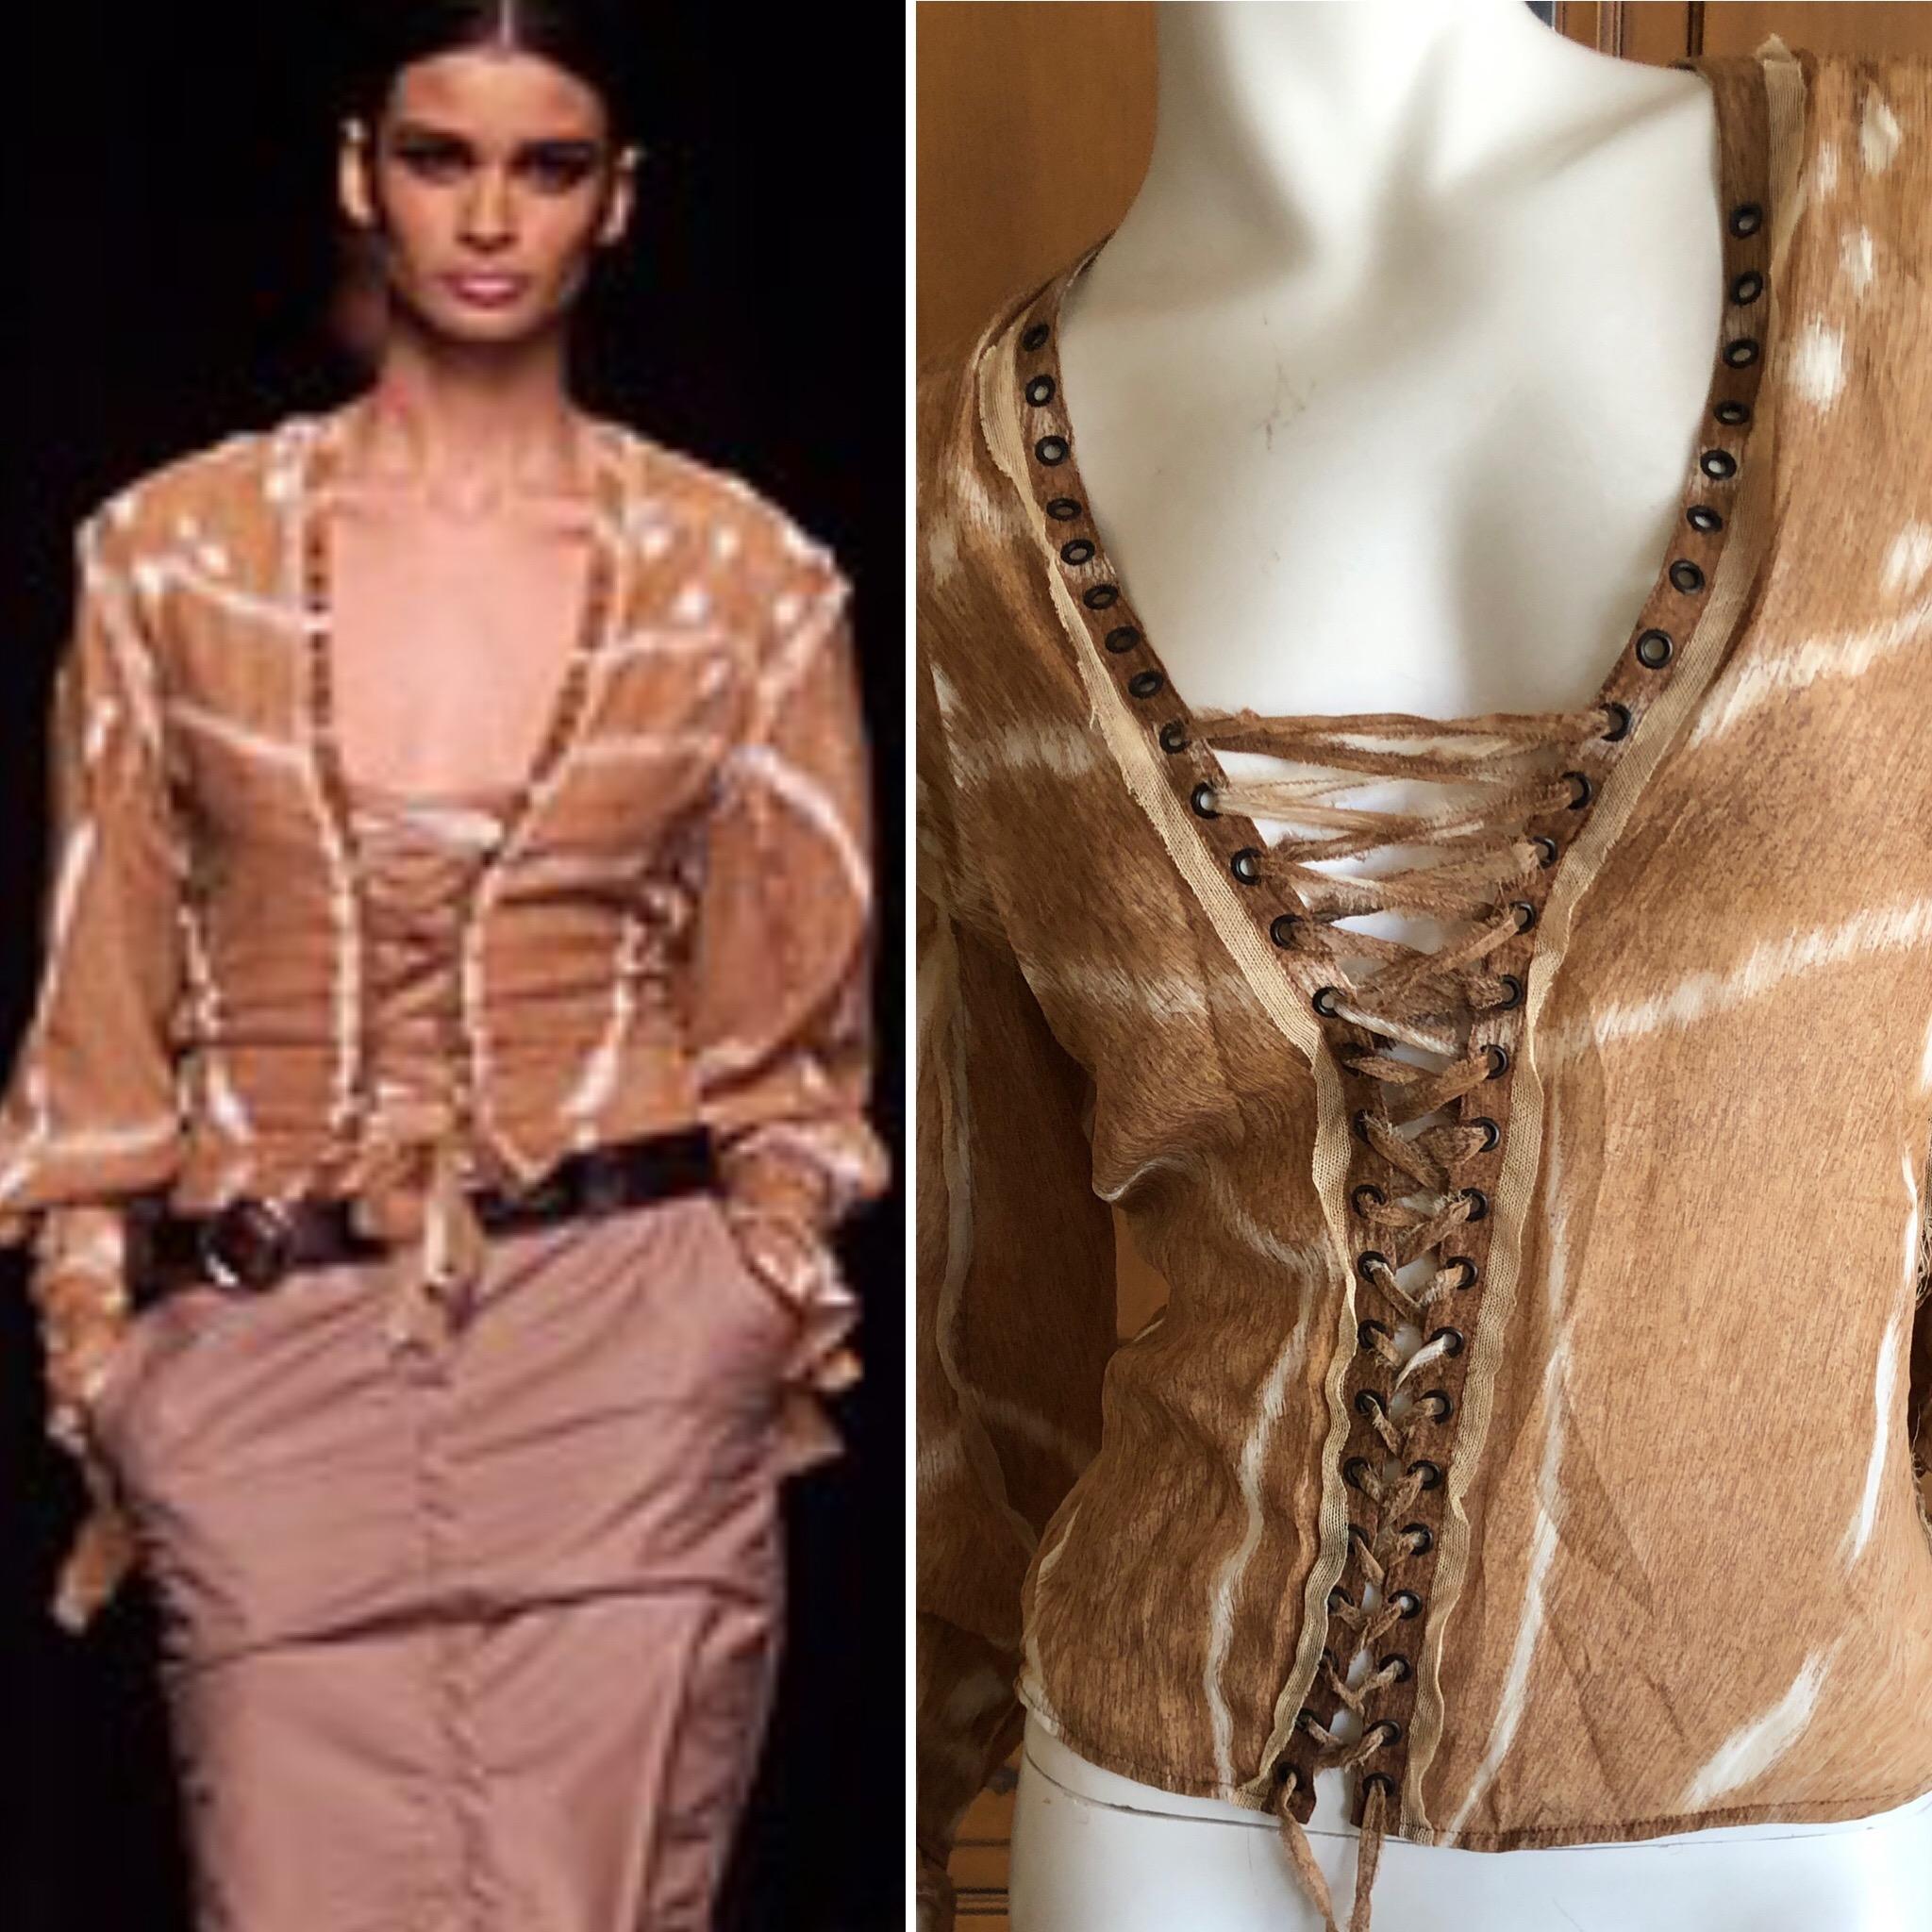 Yves Saint Laurent by Tom Ford Mombassa Collection Silk Corset Lace Up Top.
Please use the zoom feature to see all the details, laces up the back under the top layer, so chic.
Size 40
Bust  34